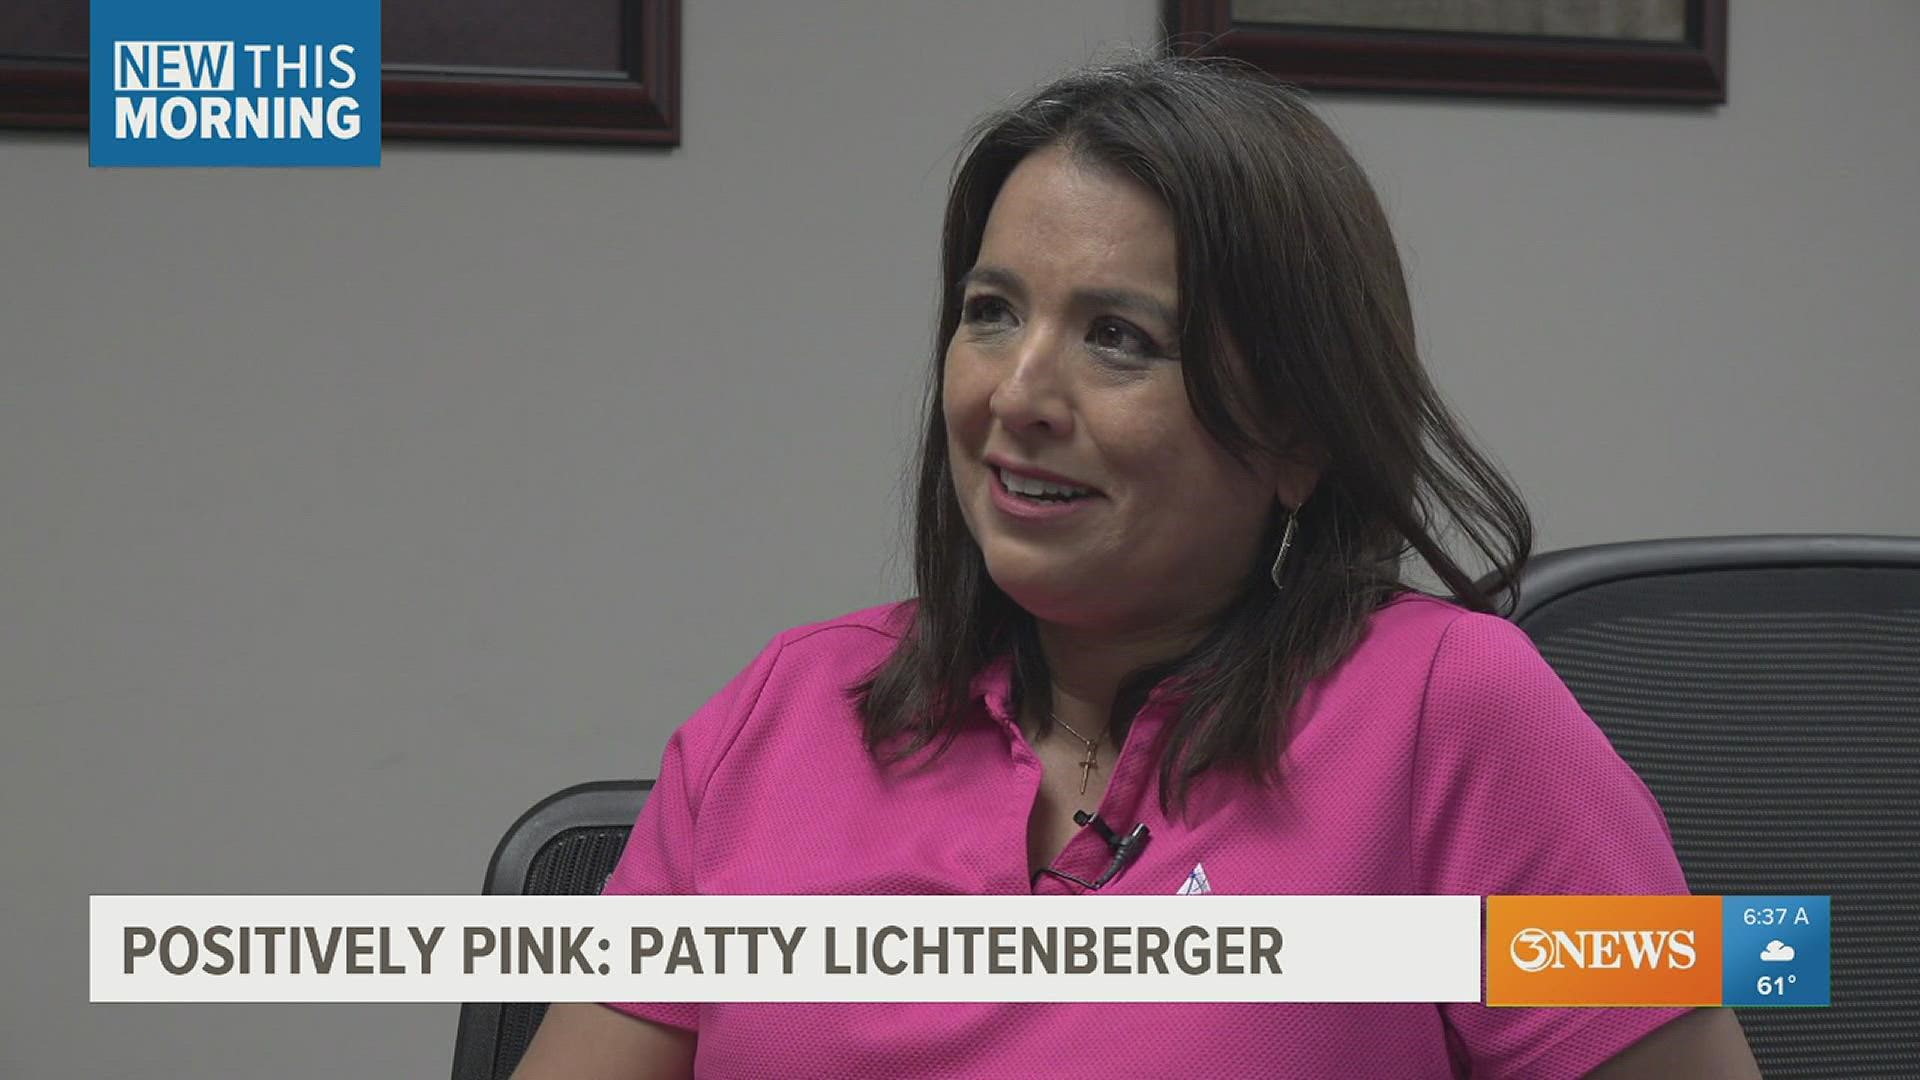 "Alone we can do so little. Together we can do so much" has been Patty Lichtenberger's motto throughout her breast cancer journey.